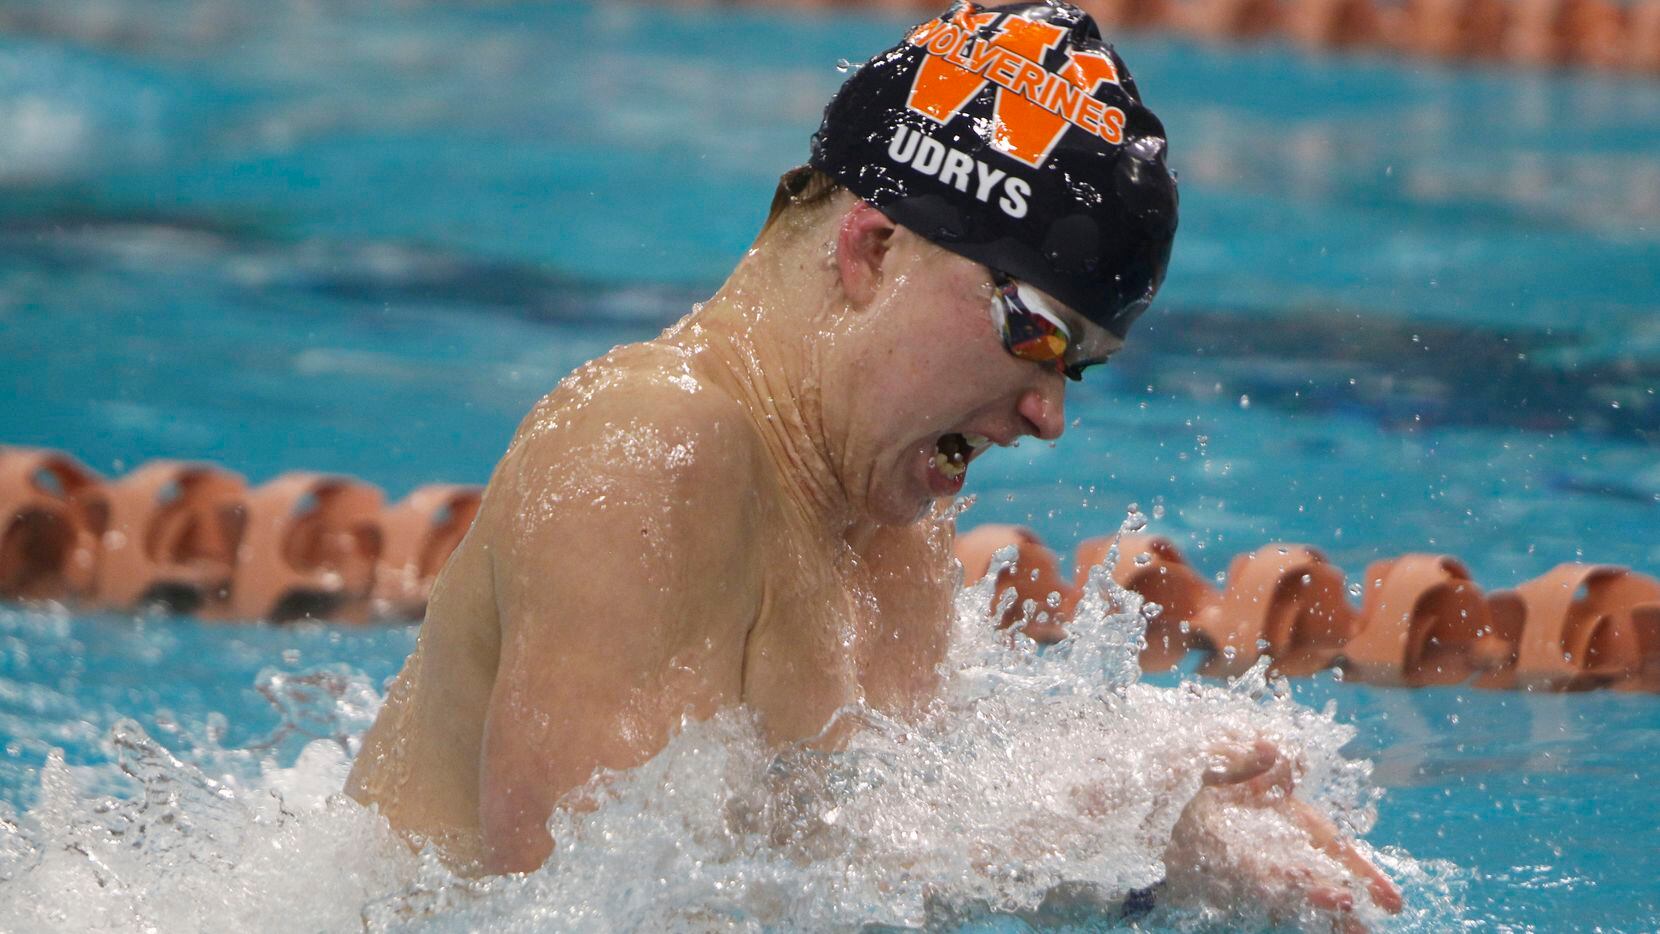 Frisco Wakeland's Alex Udrys competes in the Boys 200 yard medley relay competition. The...